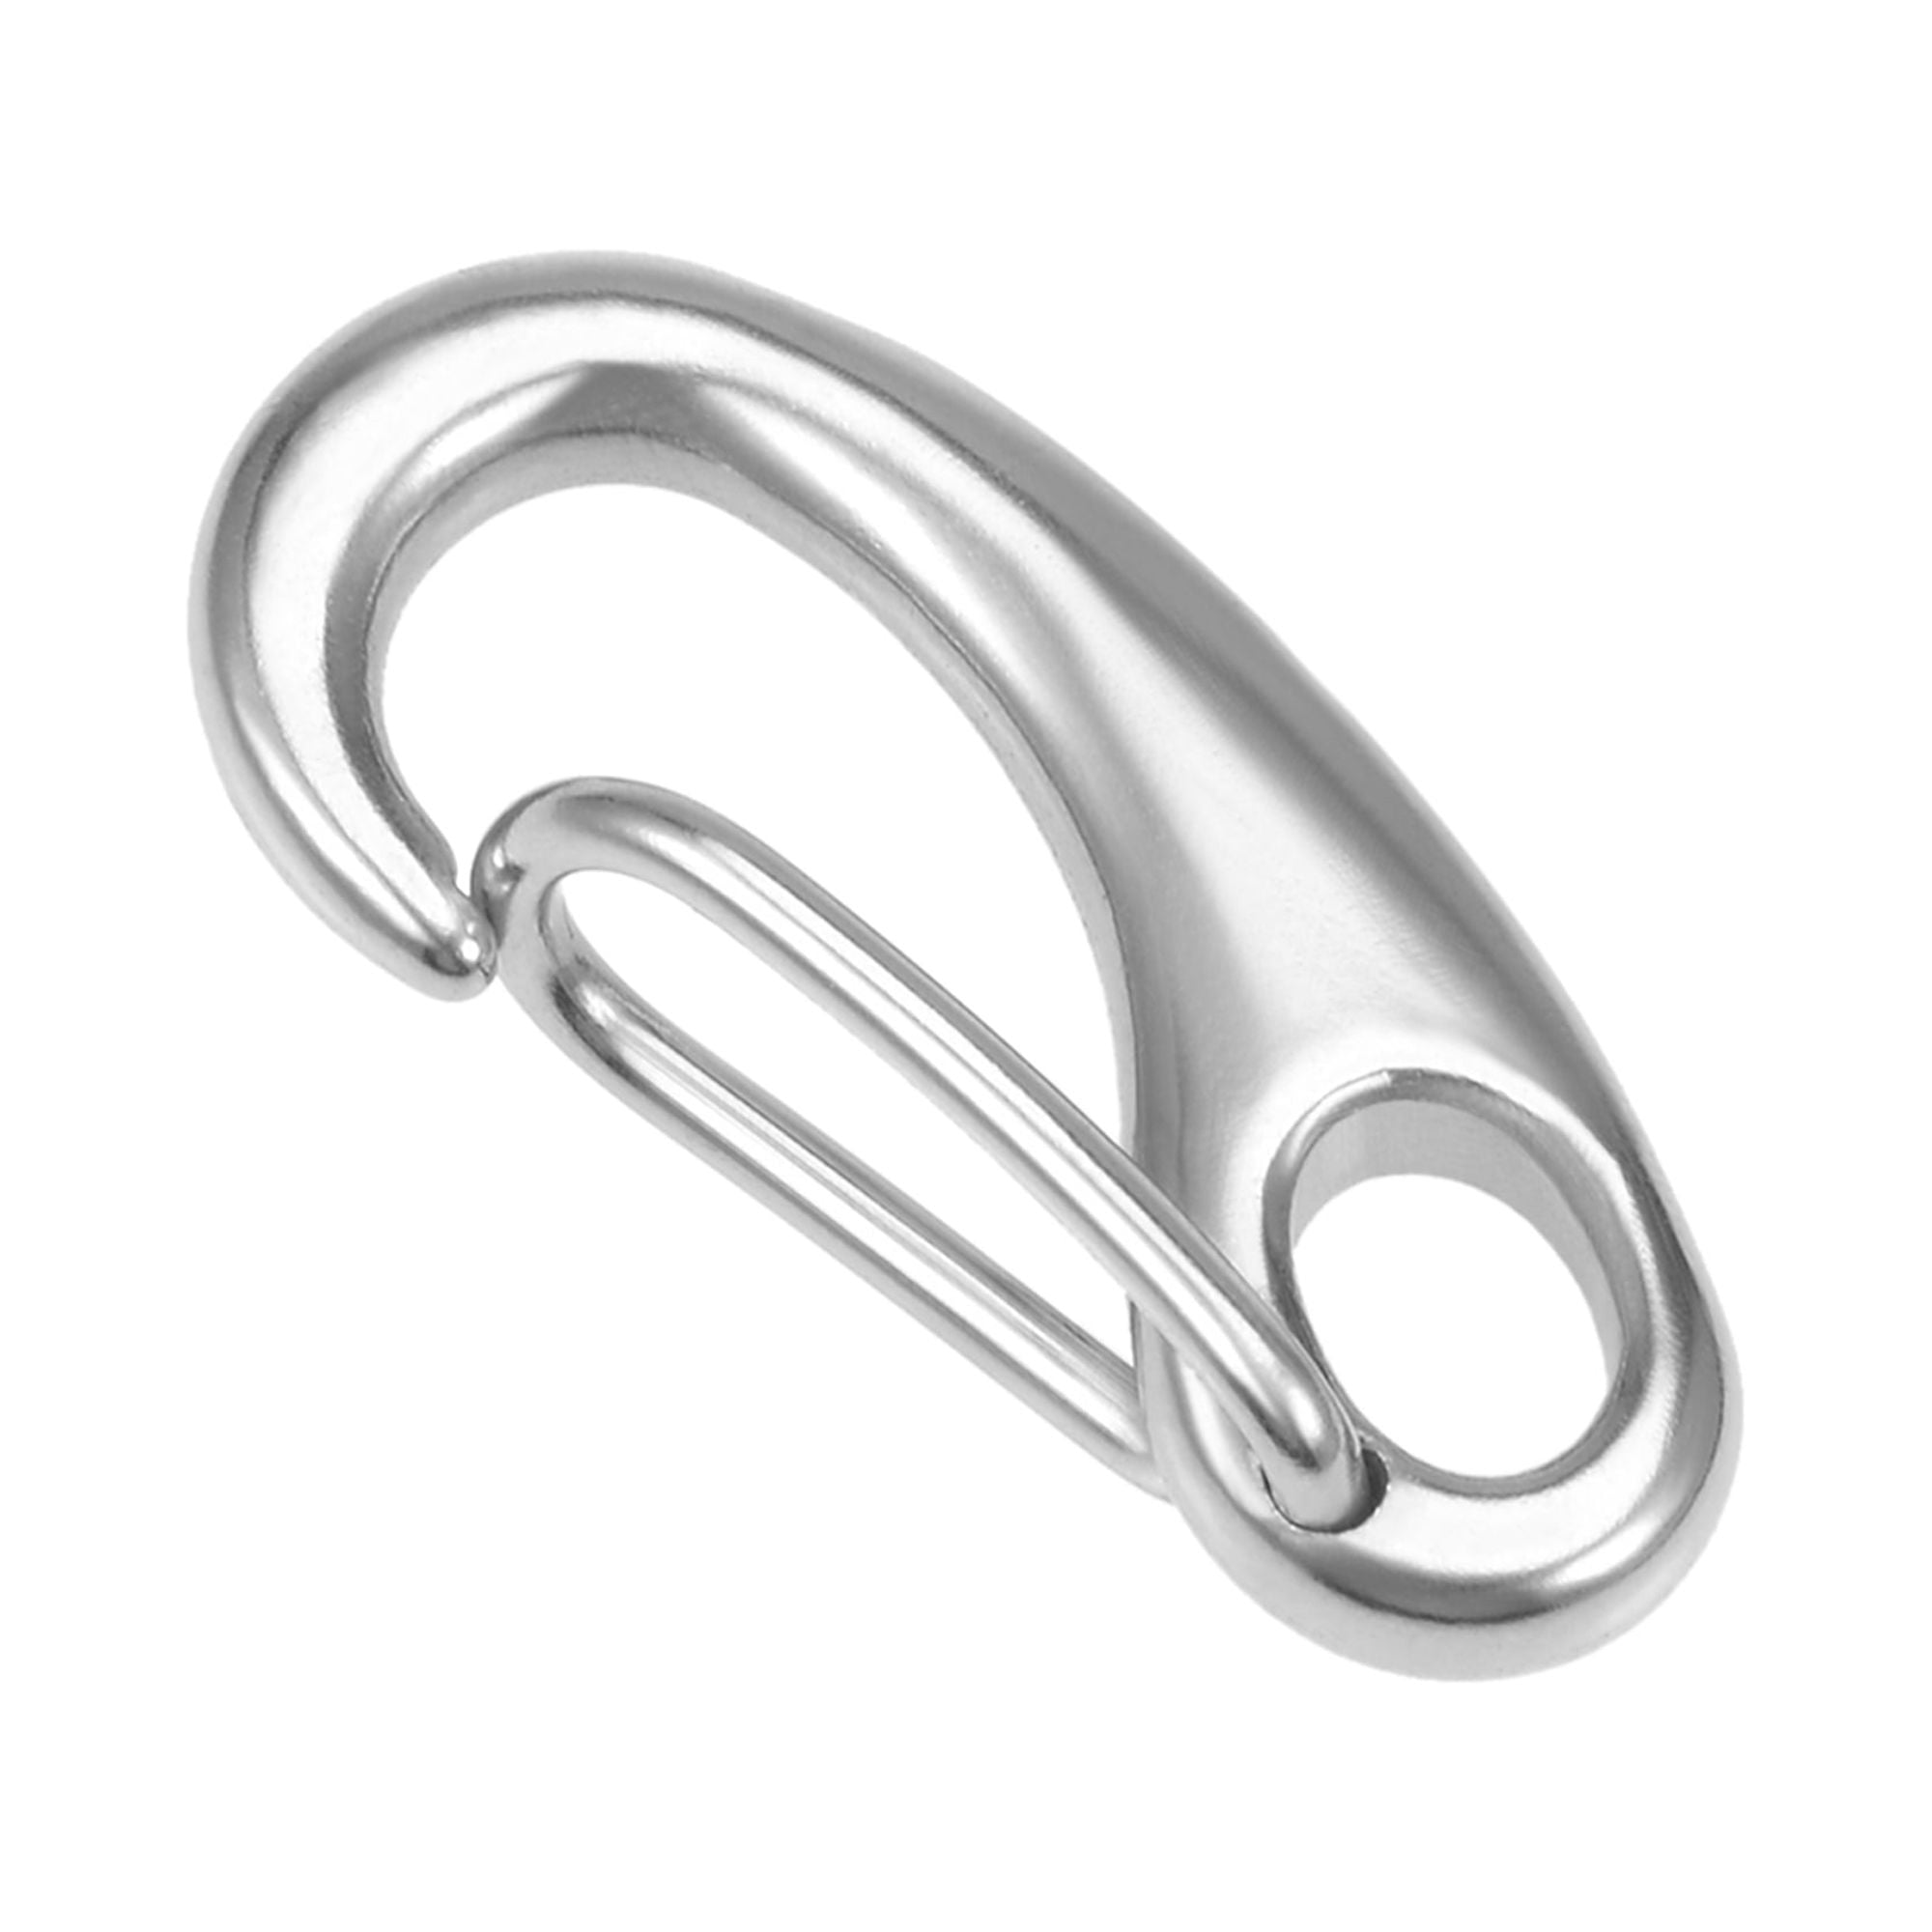 STAINLESS STEEL Carabiner Clip ~ 8mm x 80mm ~ NON RUSTING Snap Hooks Large  CLIPS